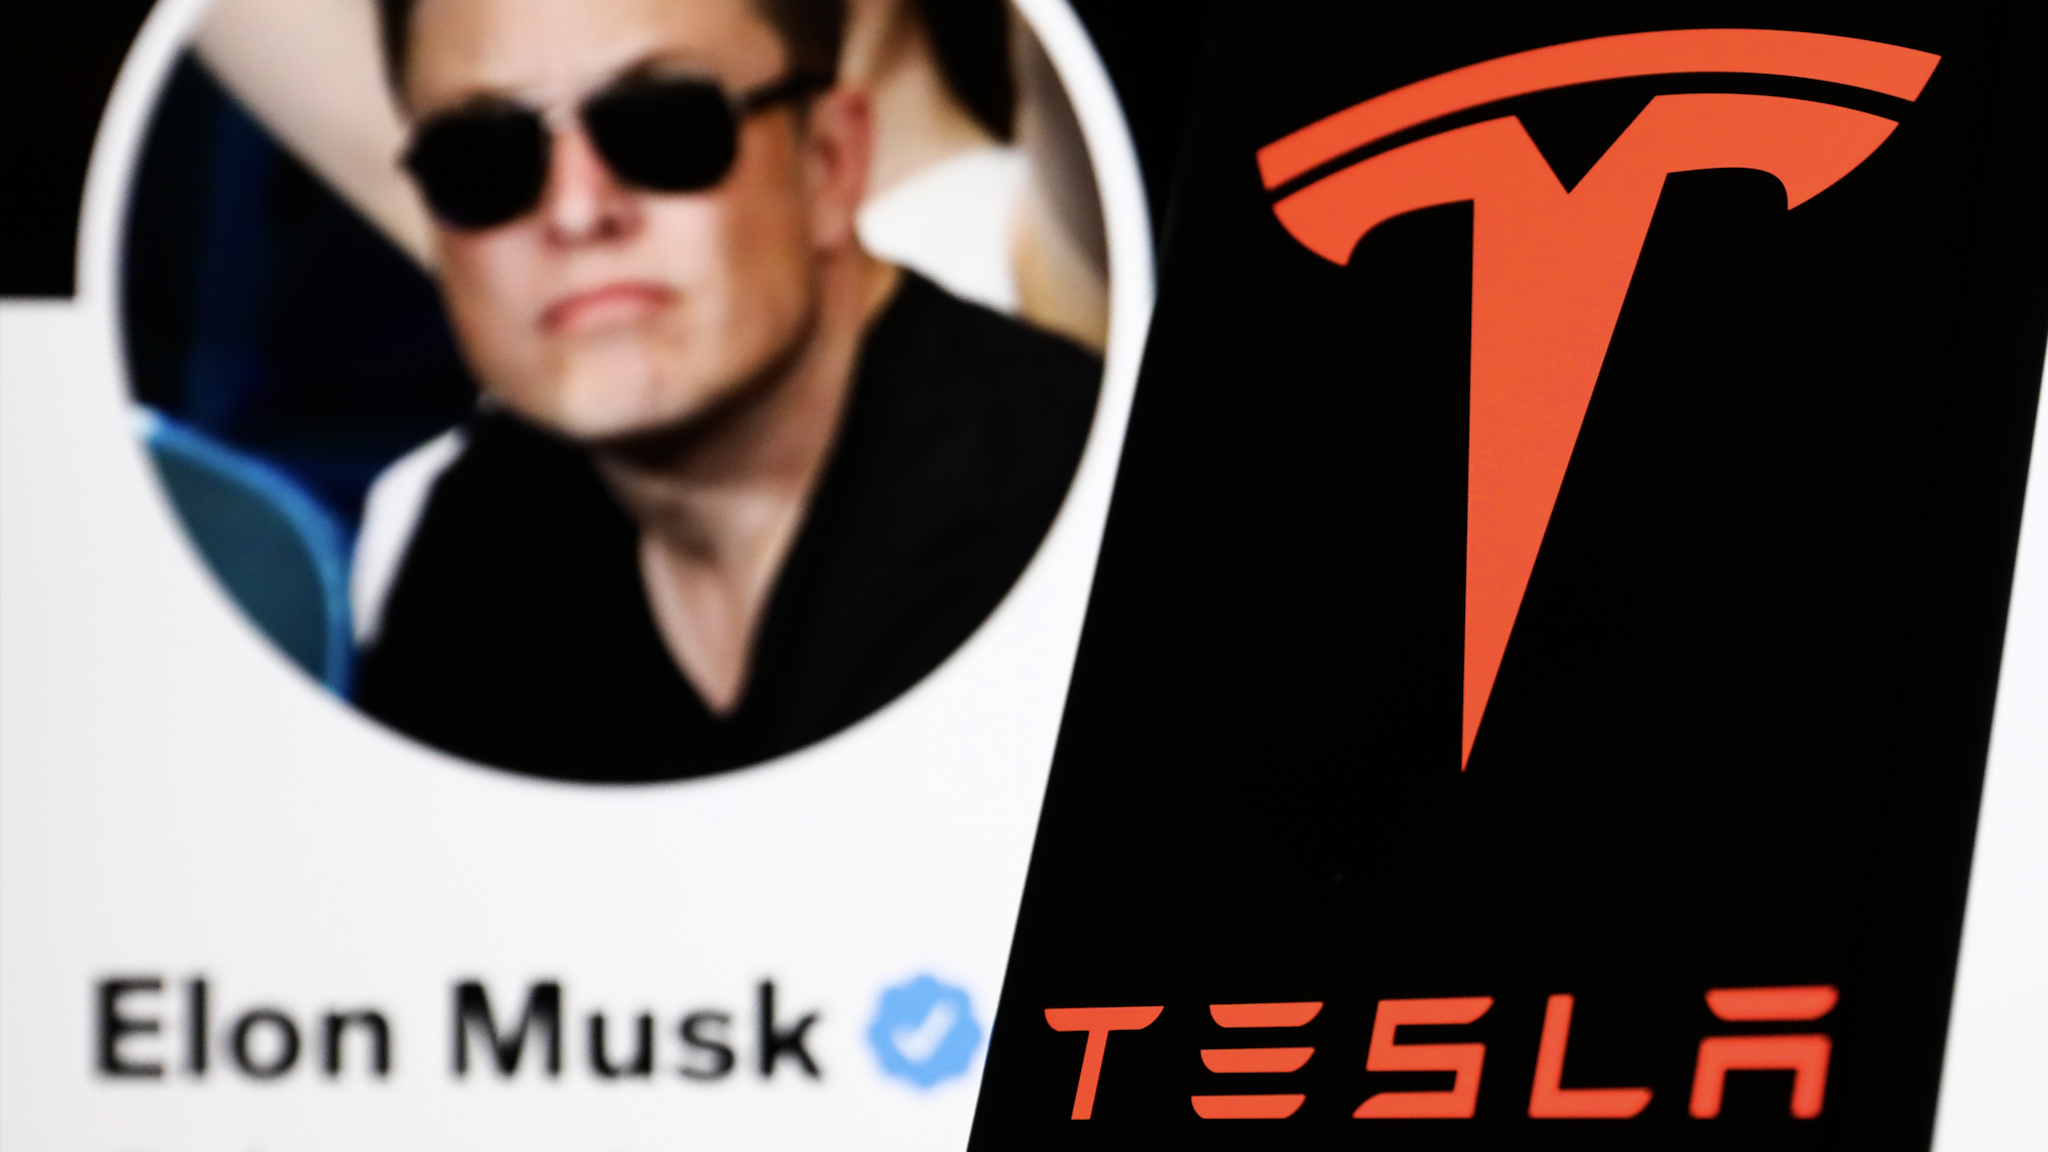 Tesla logo displayed on a phone screen and Elon Musk's Twitter account displayed on a screen in the background are seen in this illustration photo taken in Poland on April 24, 2022.